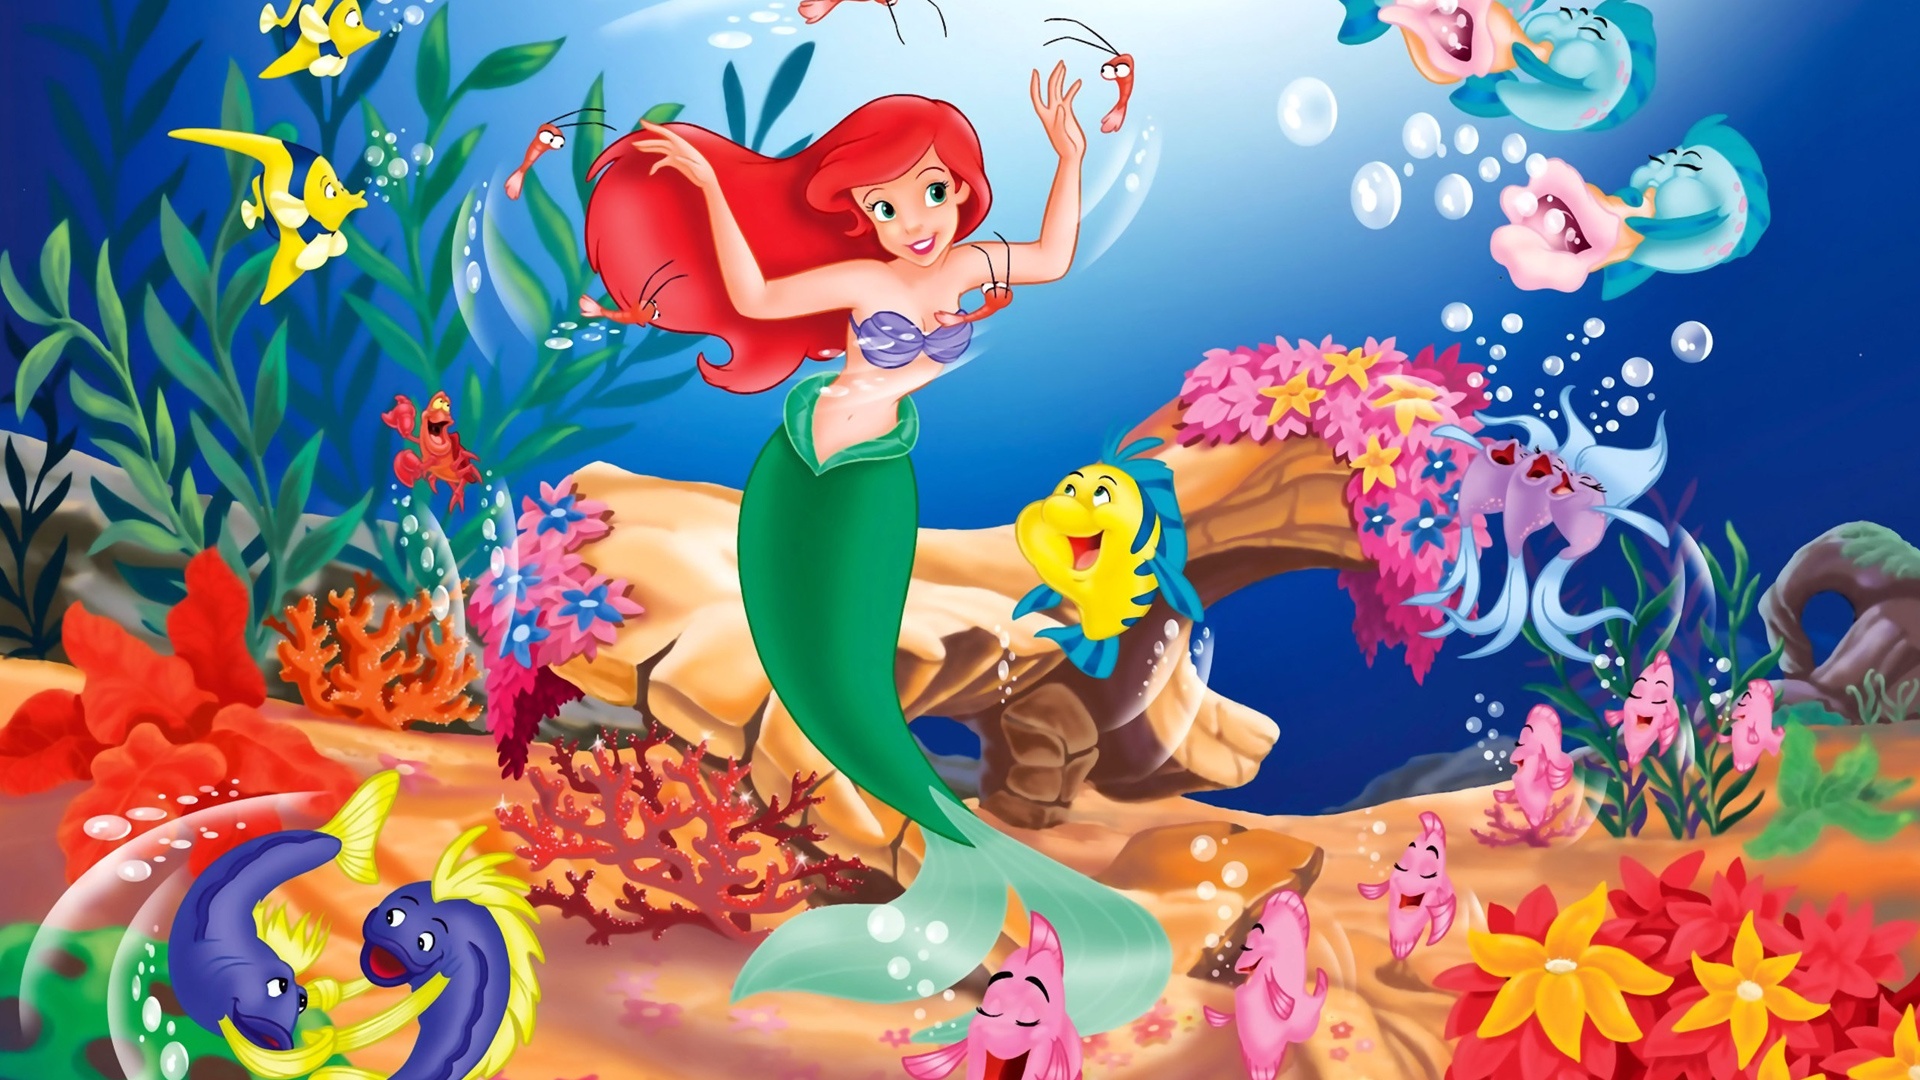 Disney The Little Mermaid Wallpapers HD Backgrounds